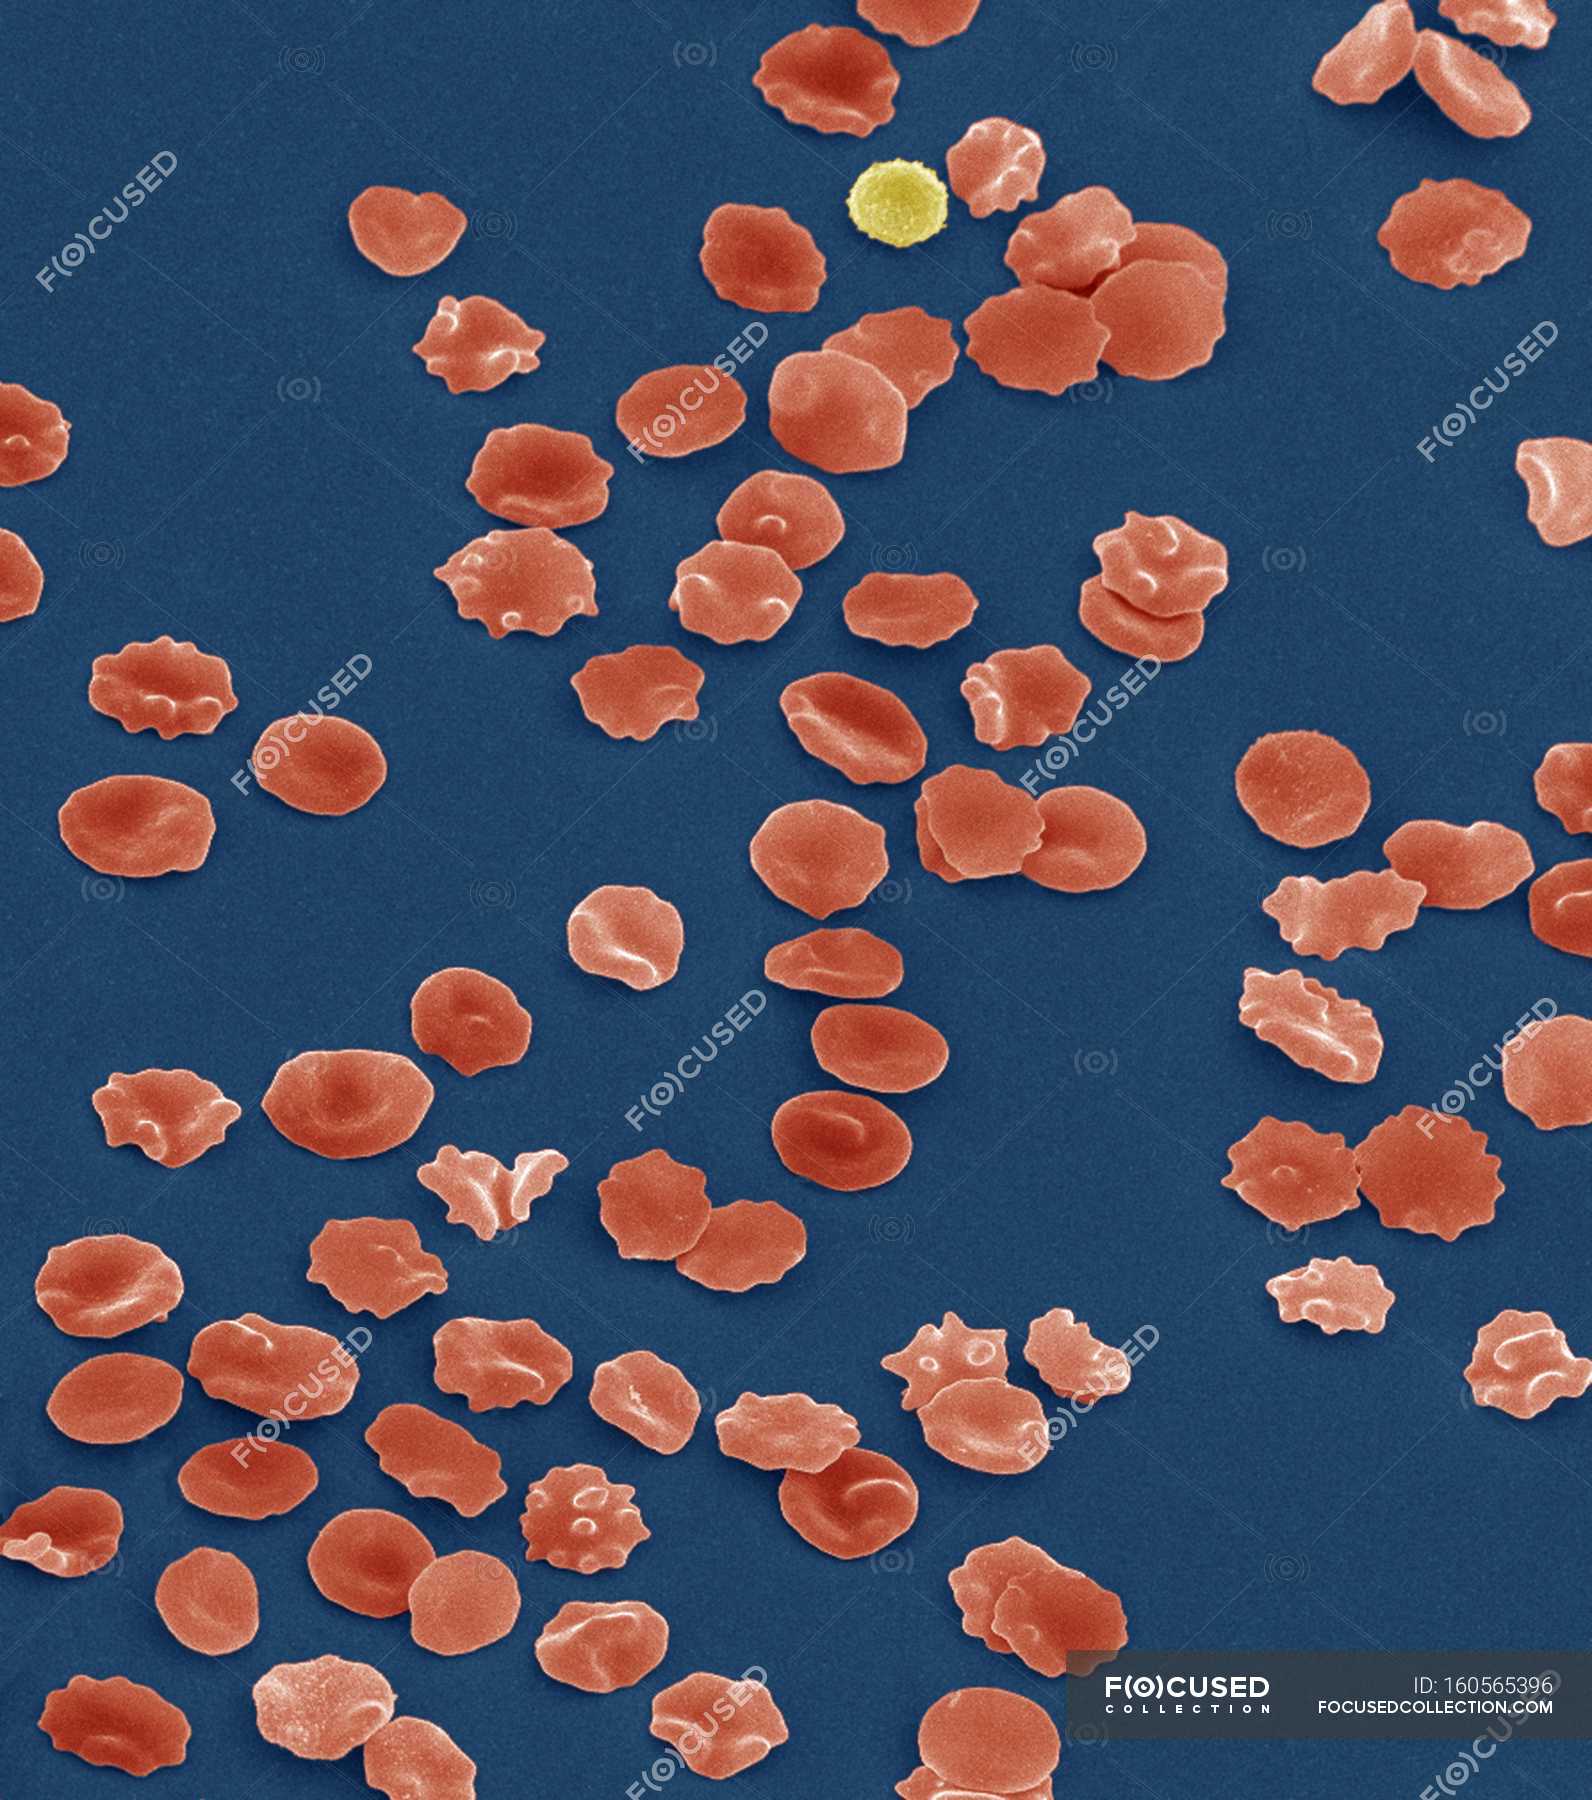 Crenated red blood cells — Micrograph, biological - Stock Photo ...